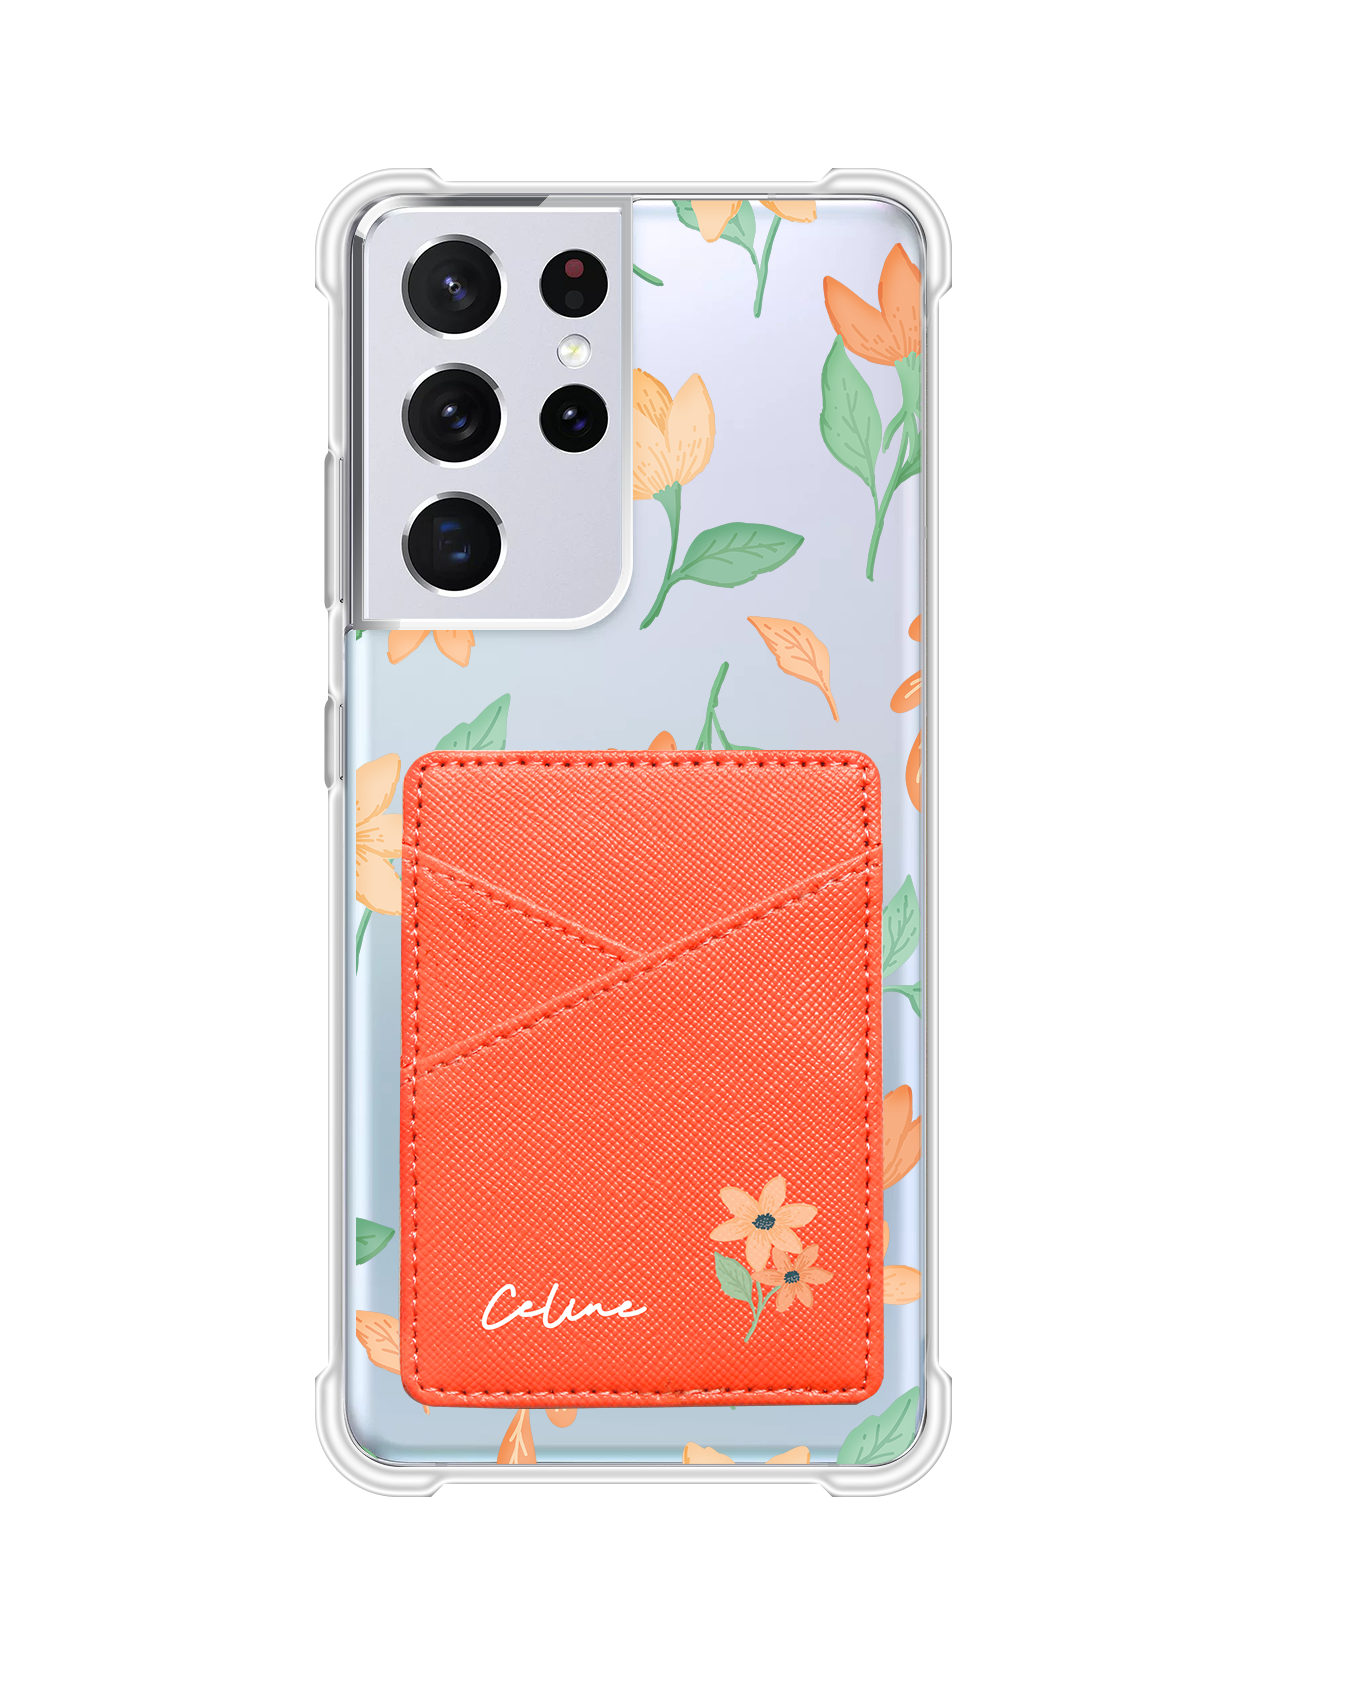 Android Phone Wallet Case - Birth Flower 4.0